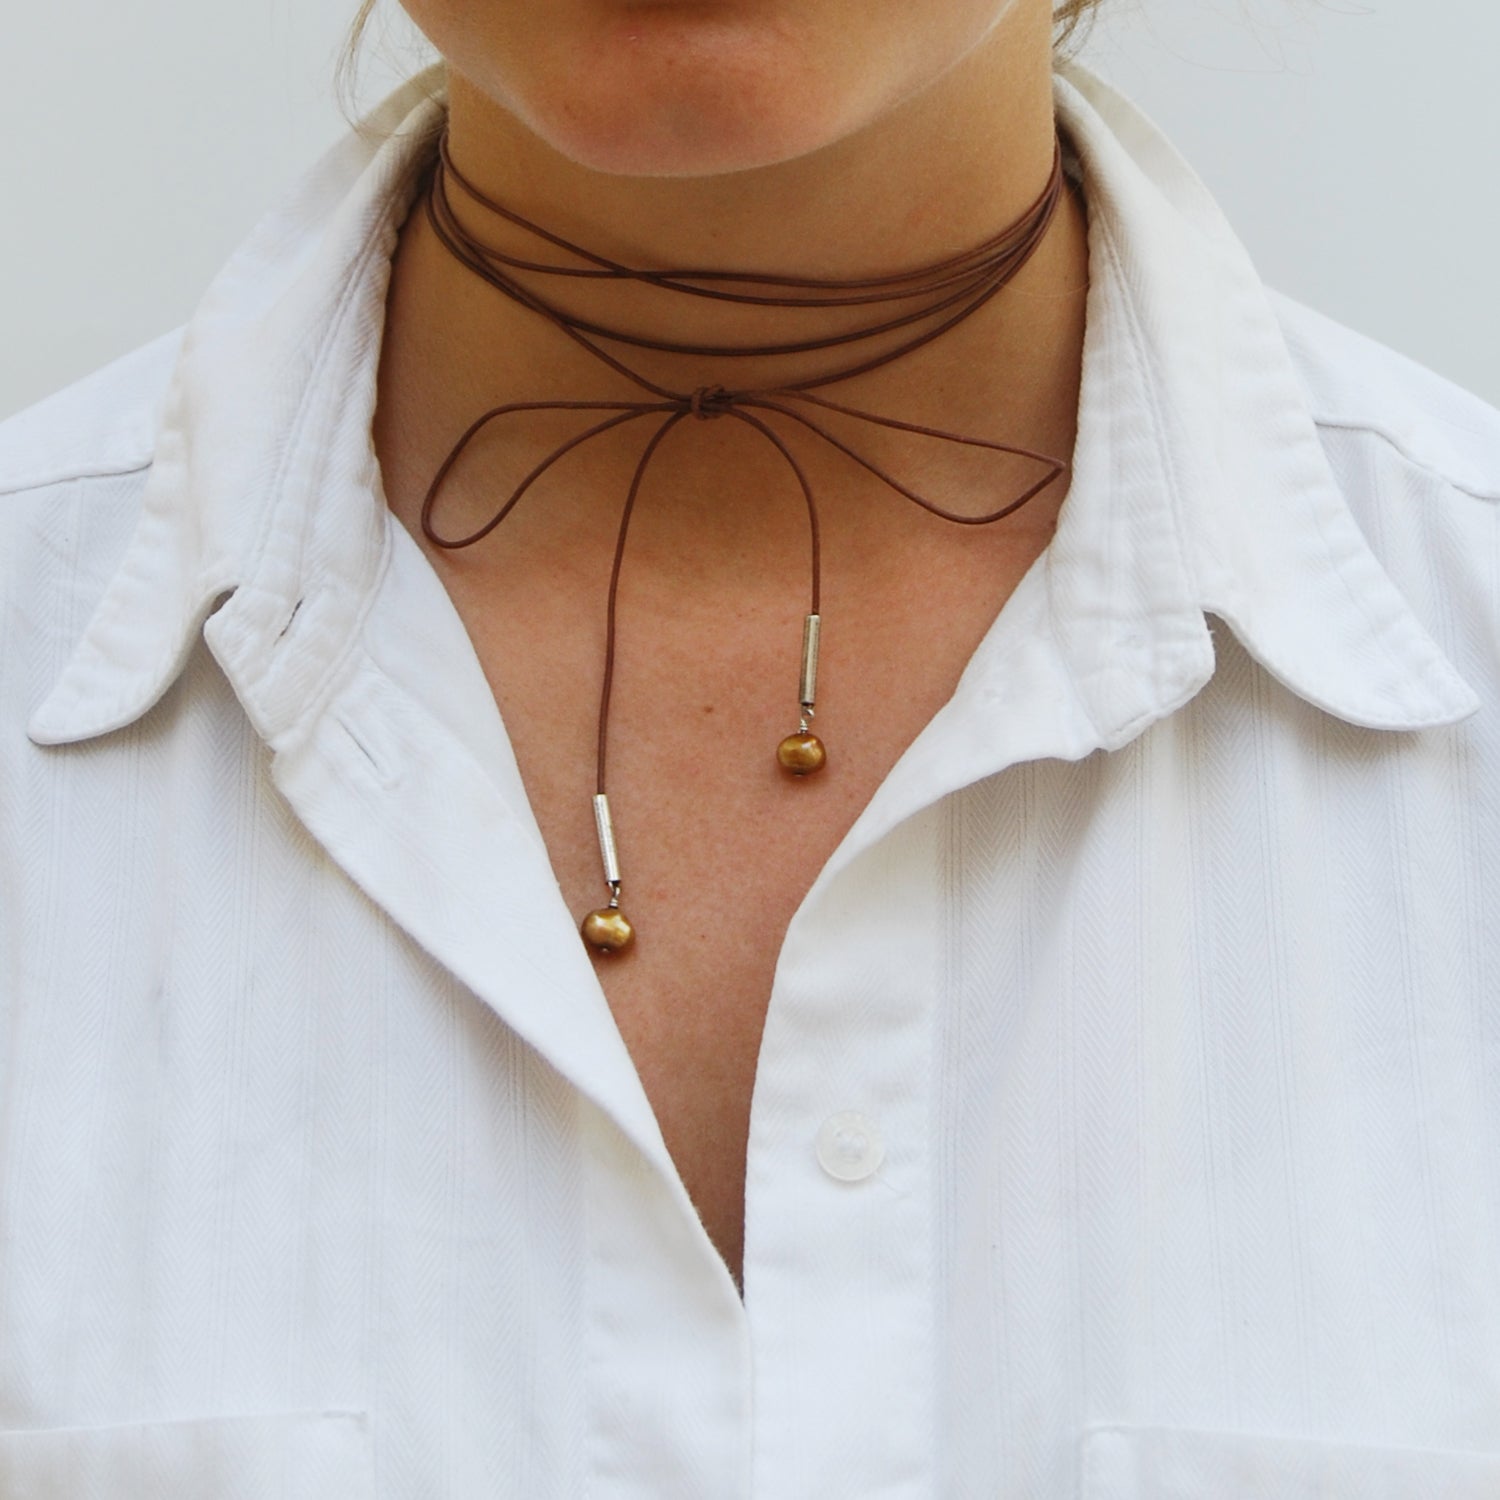 Joyful Tan Leather Necklace With Two Pearl Drops 